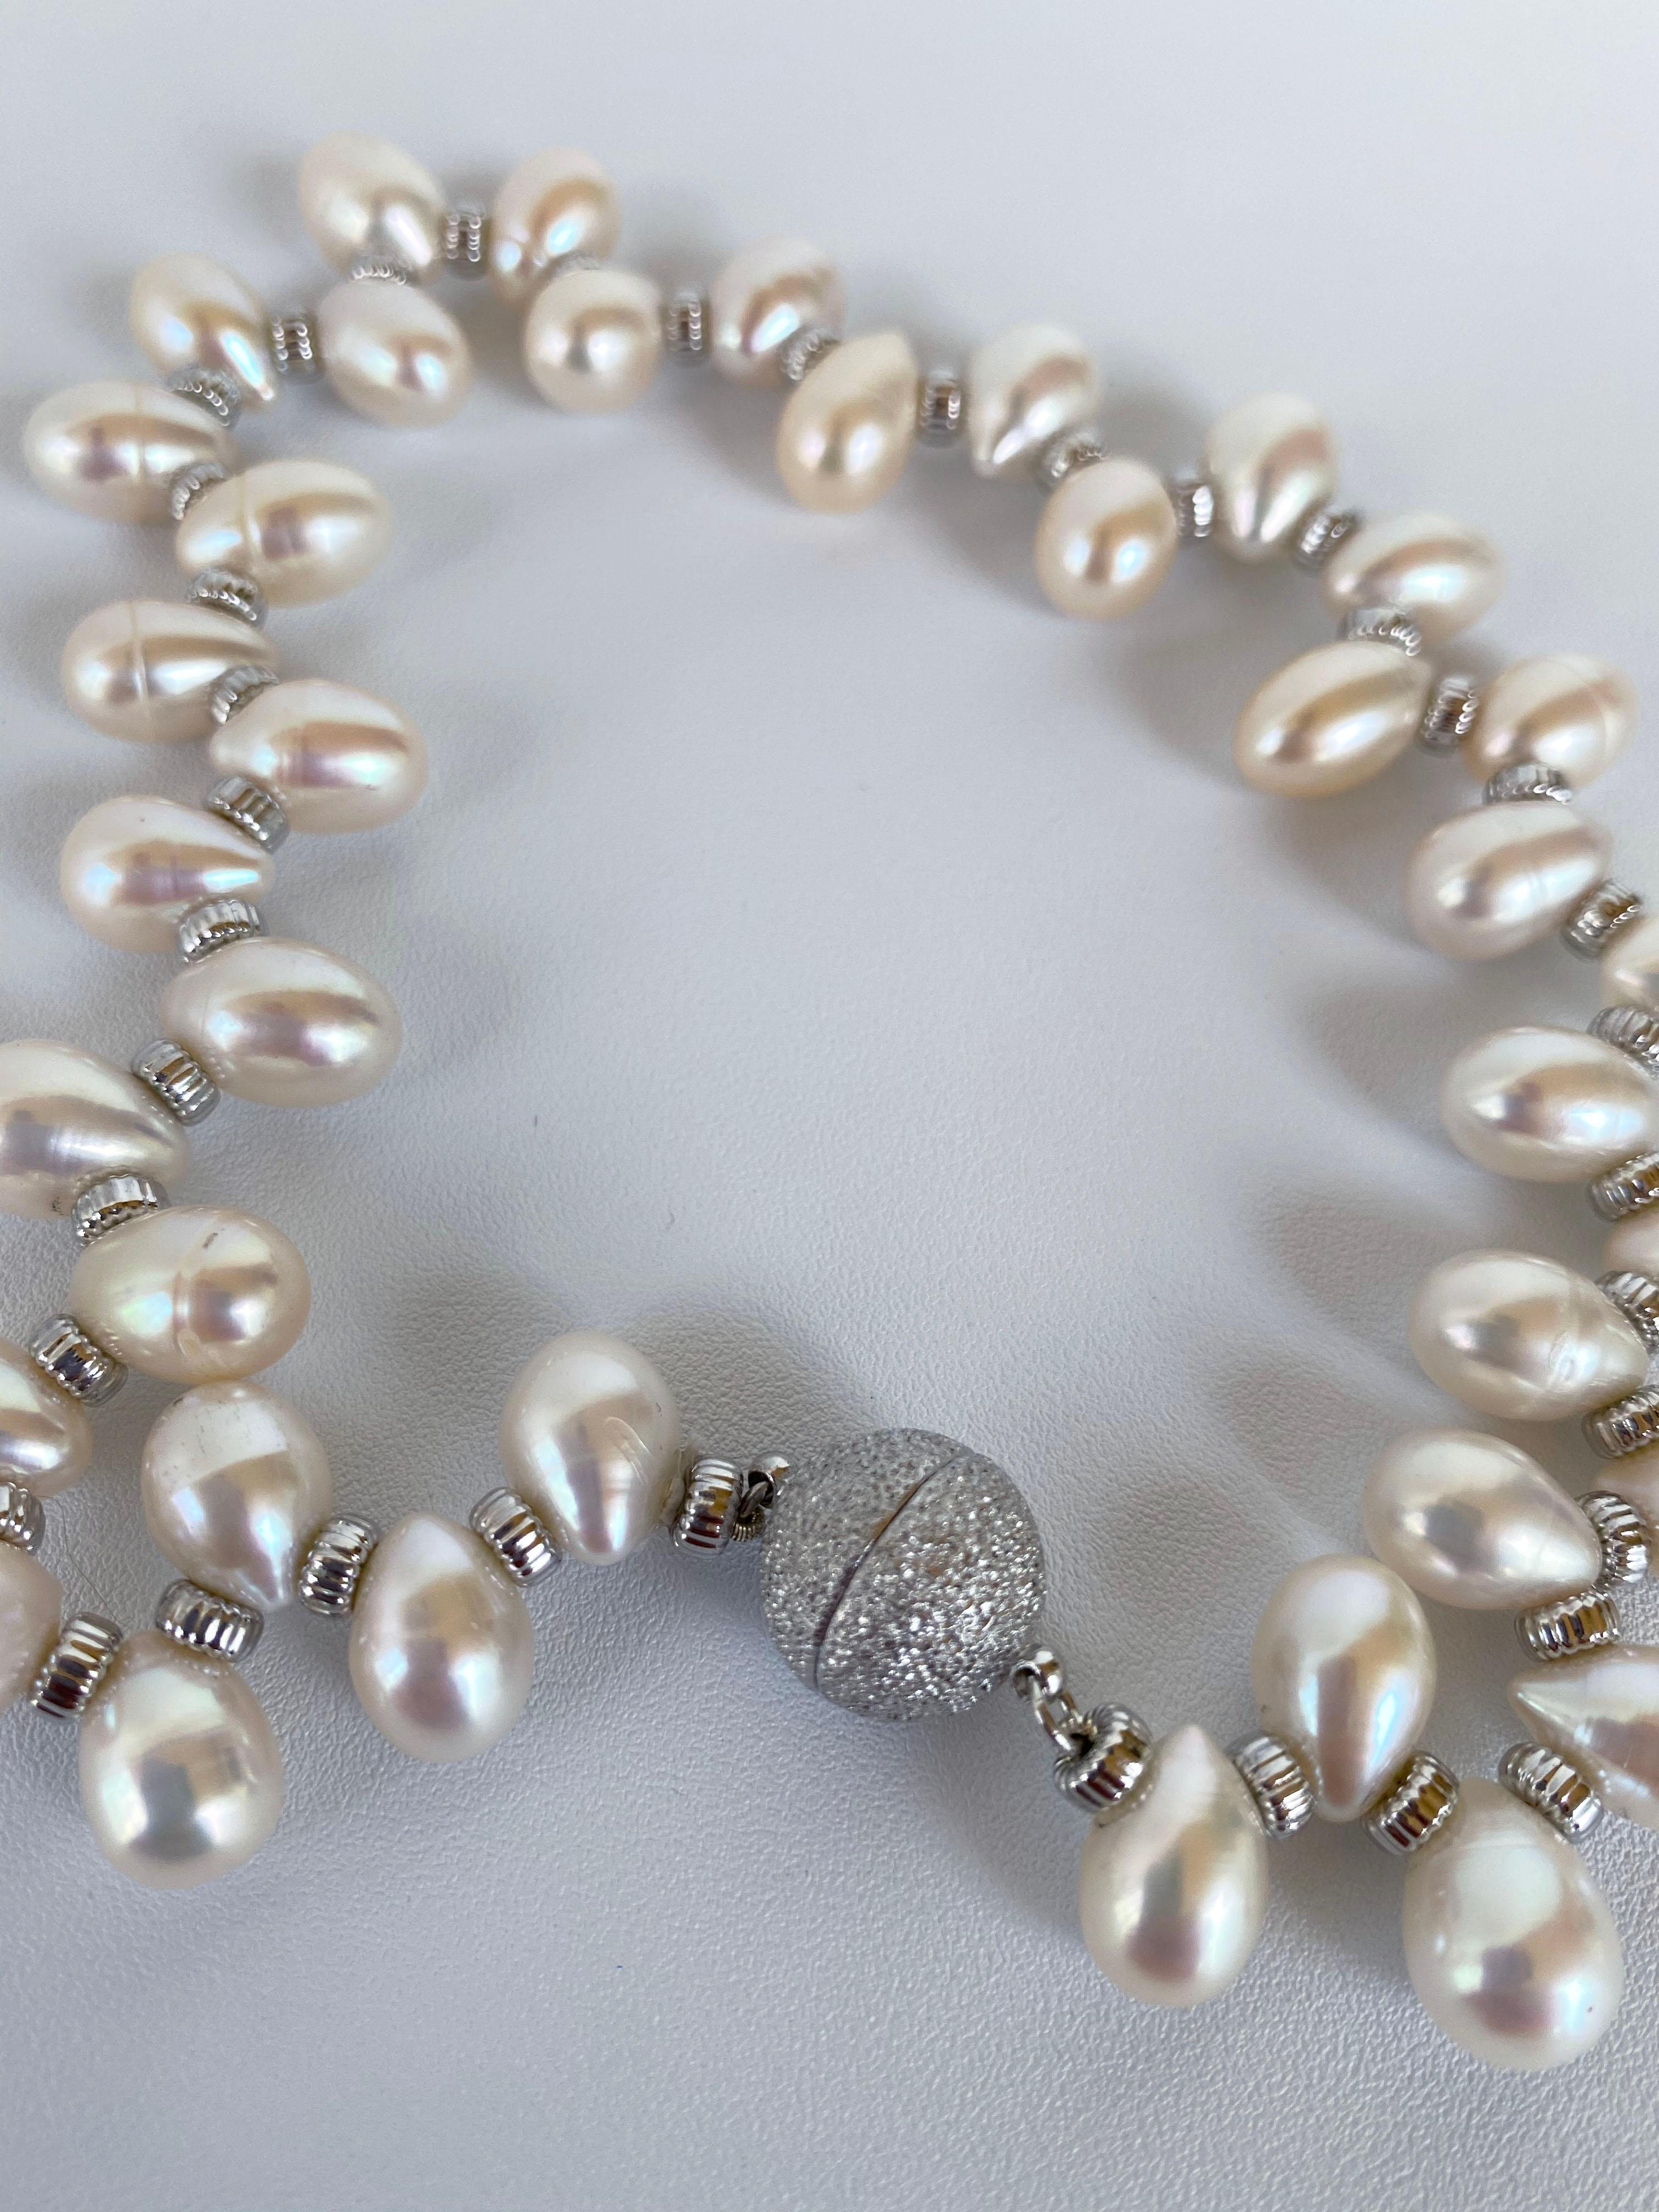 Perfect piece for your furry best friend. This necklace features Real White Teardrop Pearls separated by Silver Rhodium Plated Roundales. This elegant and formal necklace is a wonderful addition to make your pet spark! This necklace meets as a